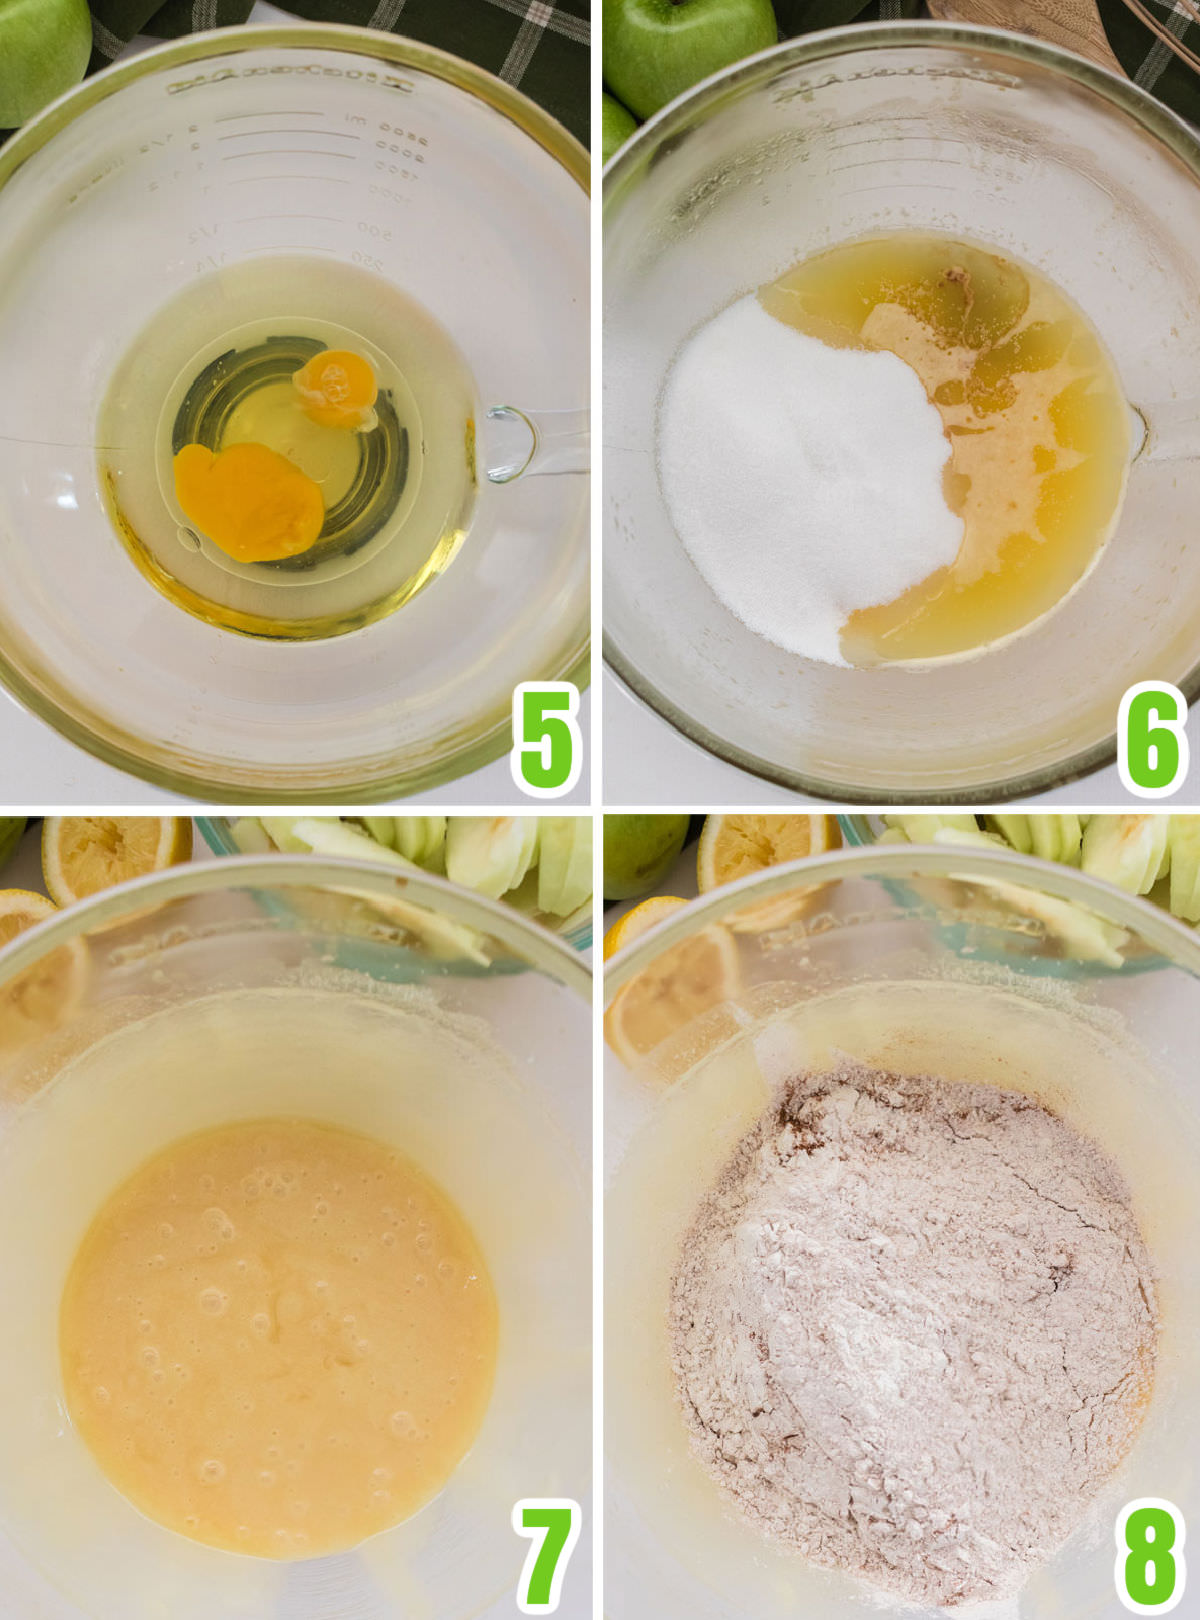 Collage image showing how to make the Apple Cake batter.